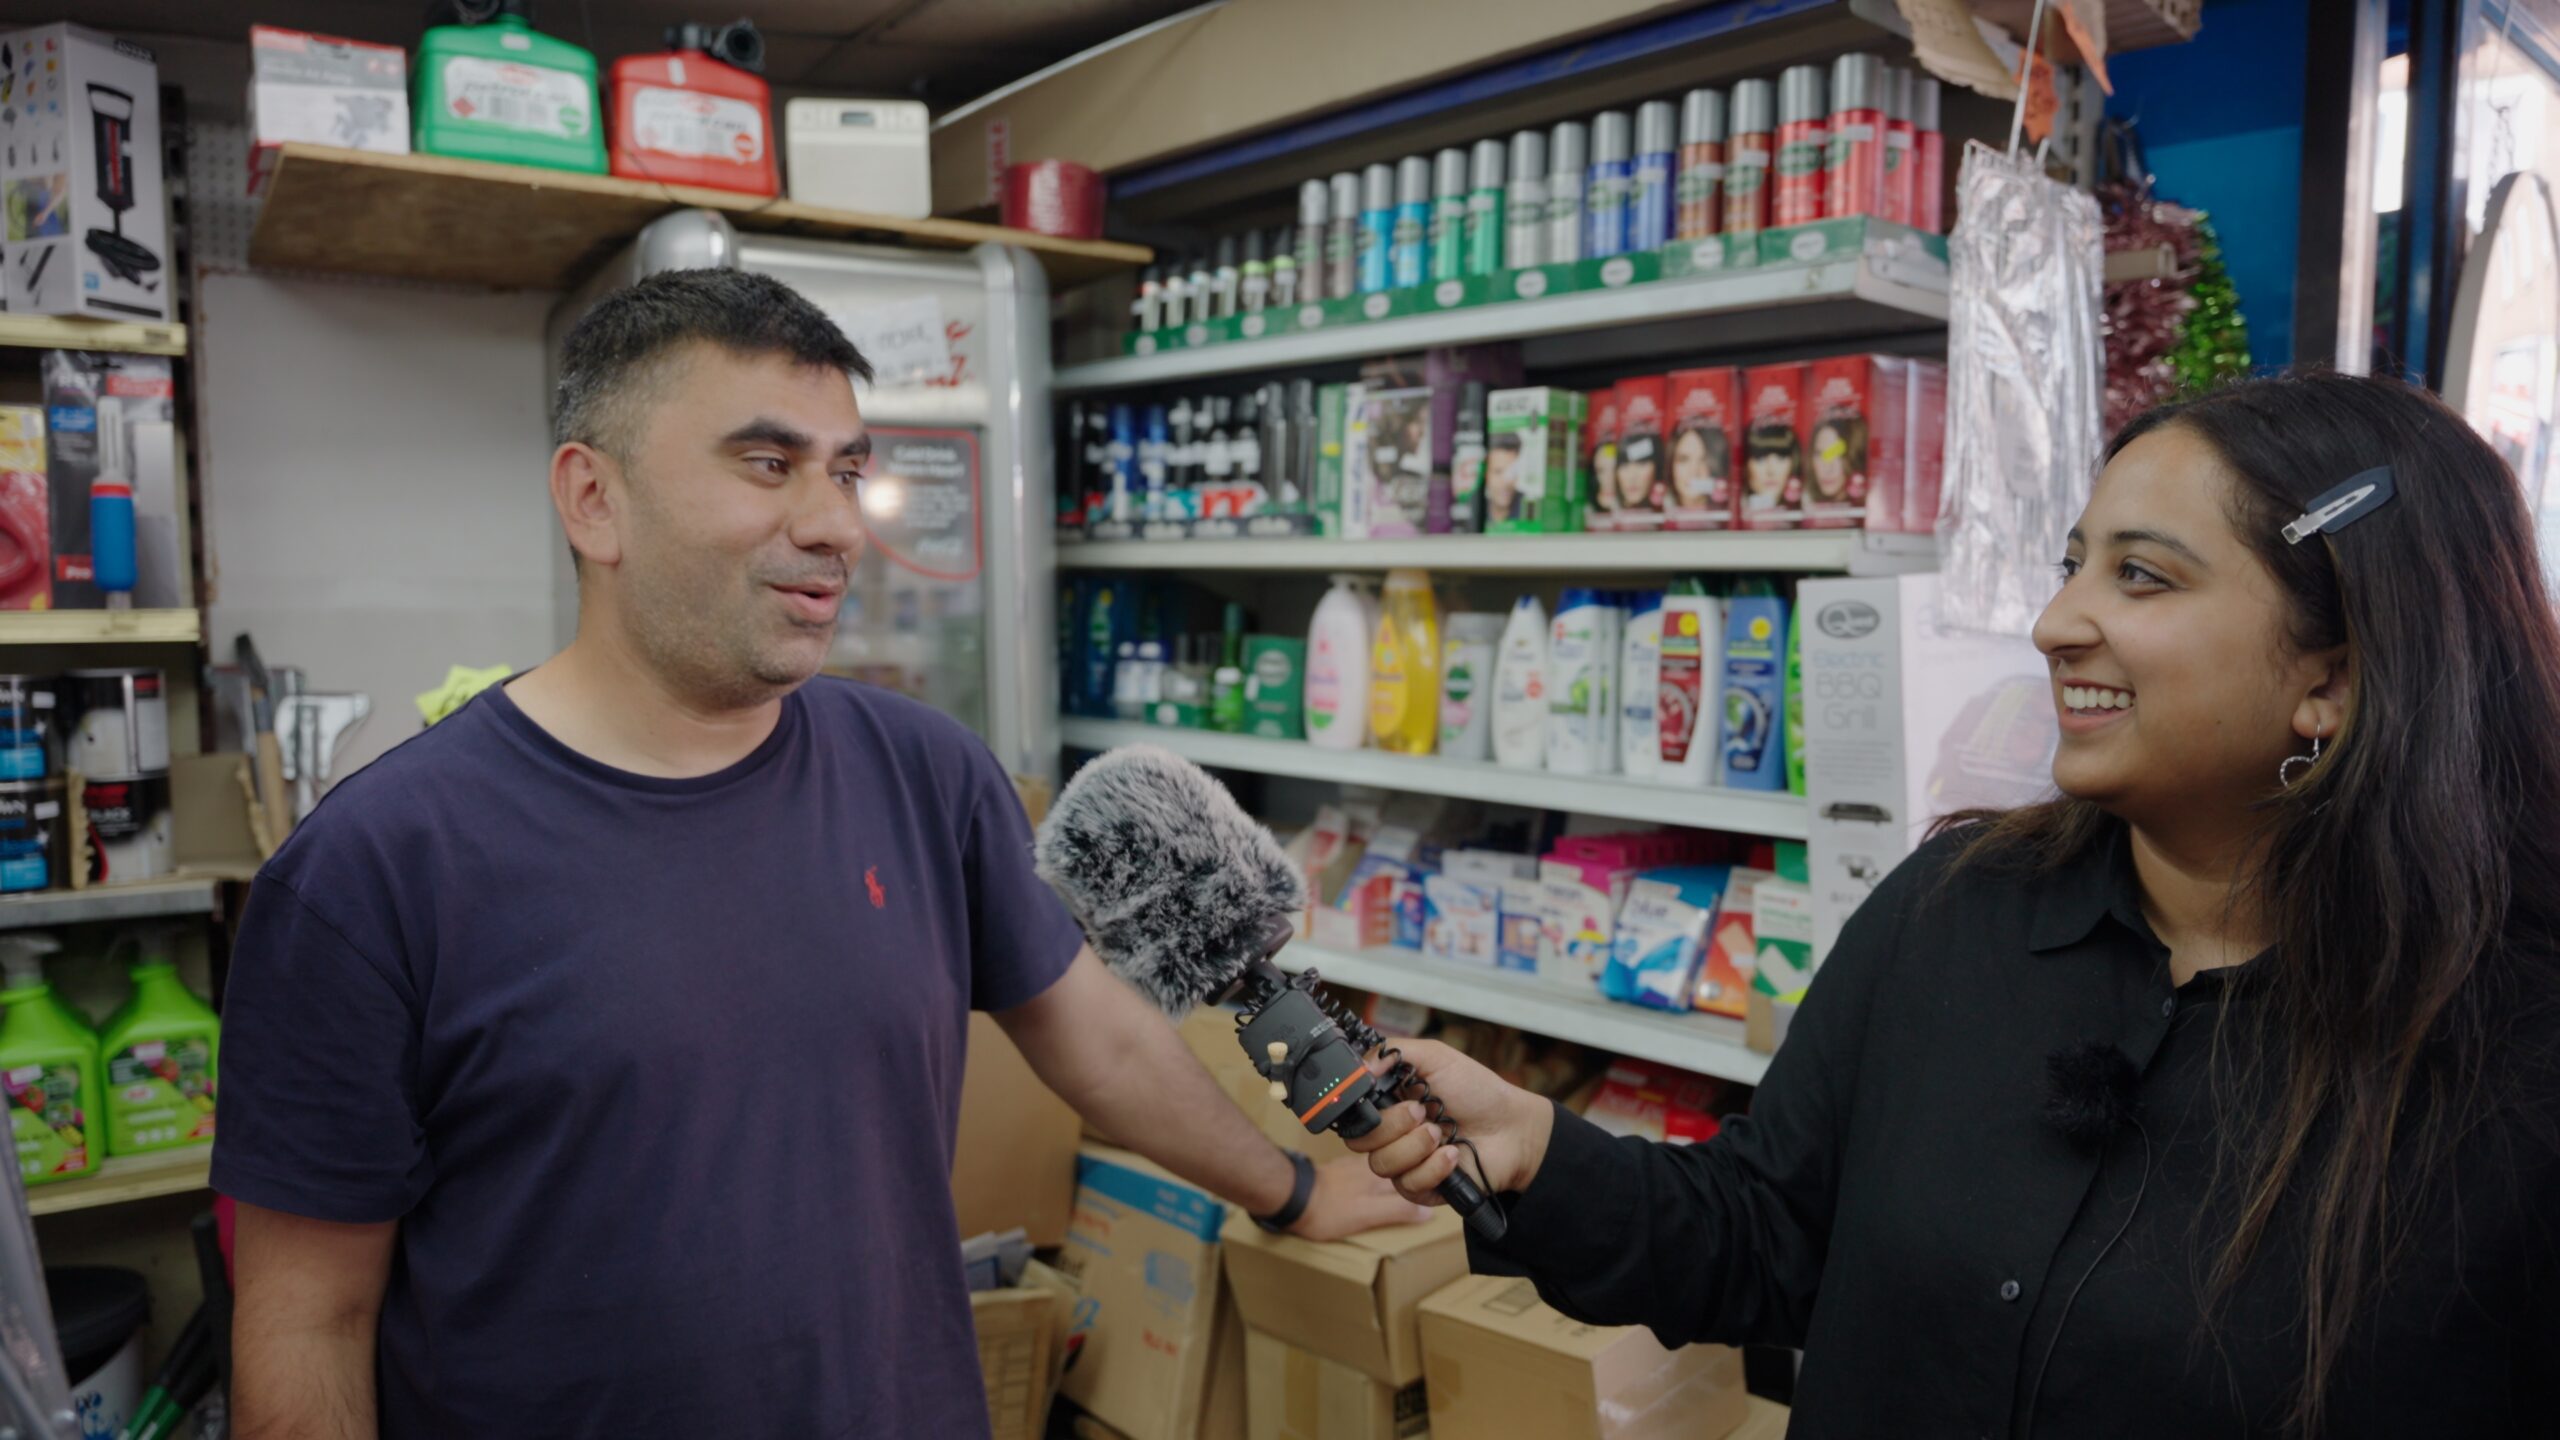 Interviewer with microphone speaking to Luton shop owner